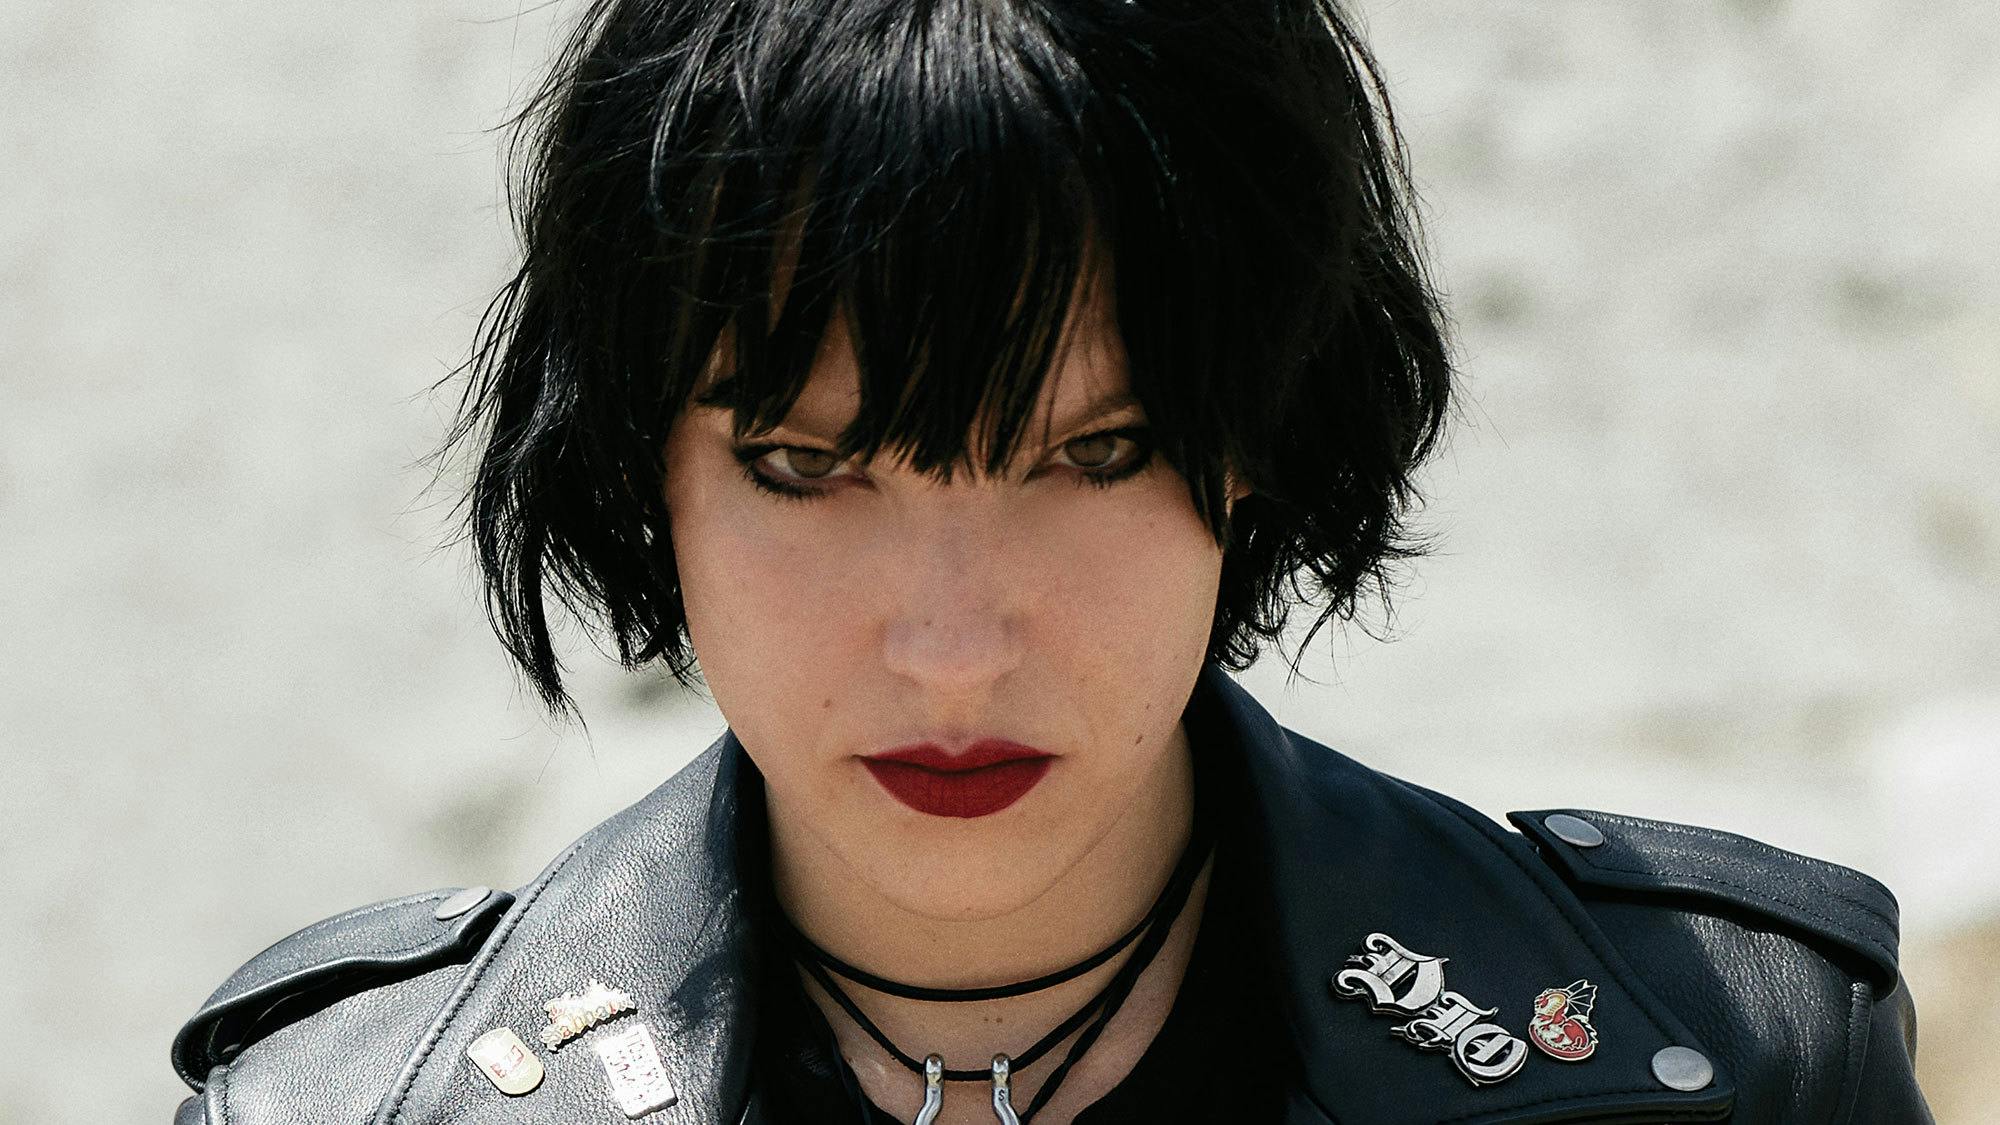 Halestorm's Lzzy Hale: The 10 songs that changed my life